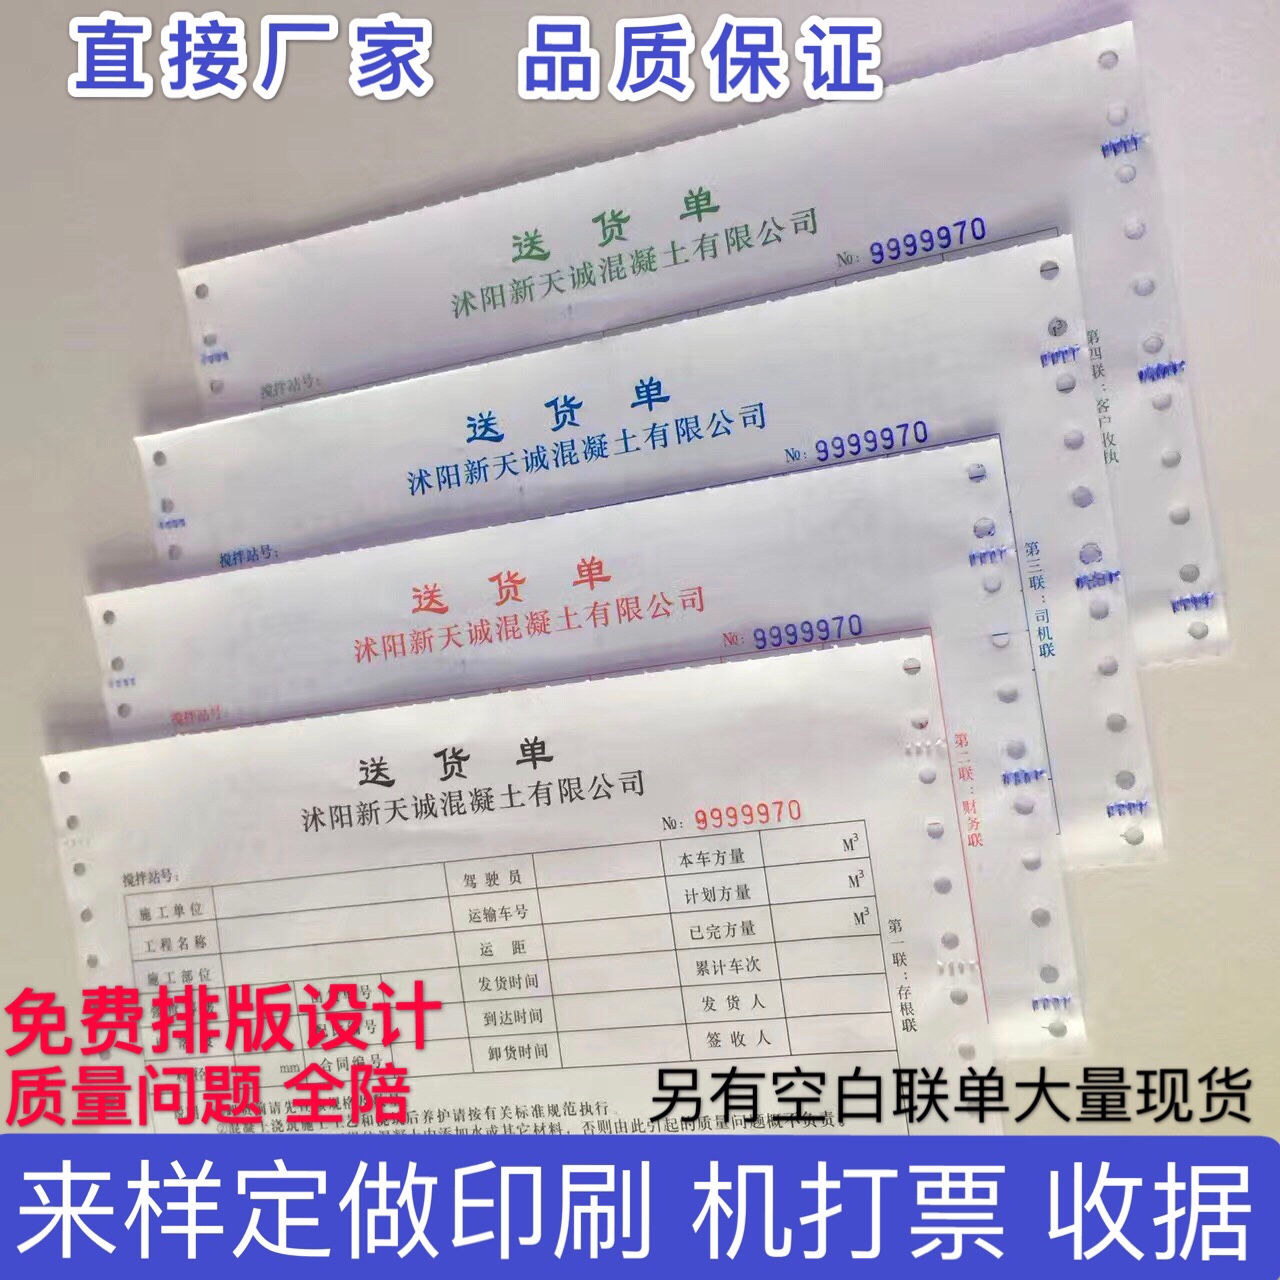 Customized computer single printing paper with holes on both sides of the carbonless copy concrete sales maintenance order logistics consignment note